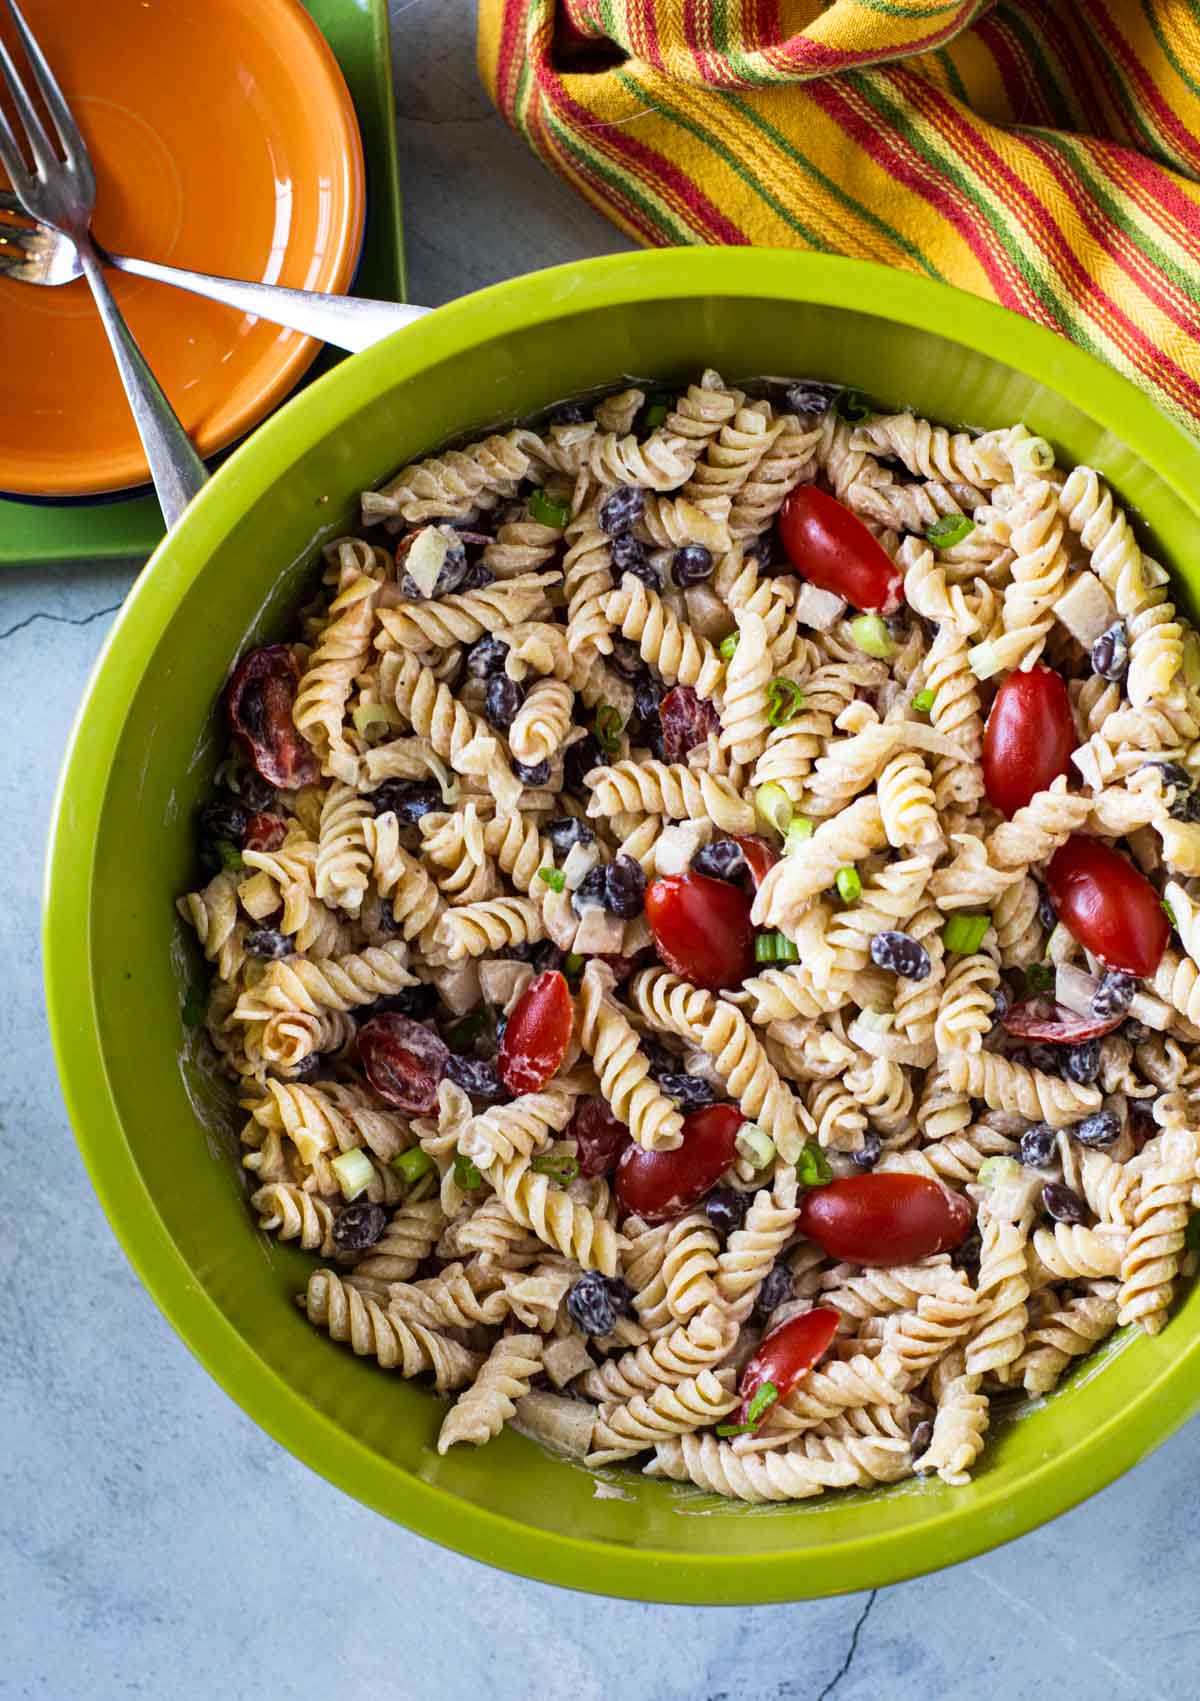 BBQ Pasta salad with black beans and cherry tomatoes.